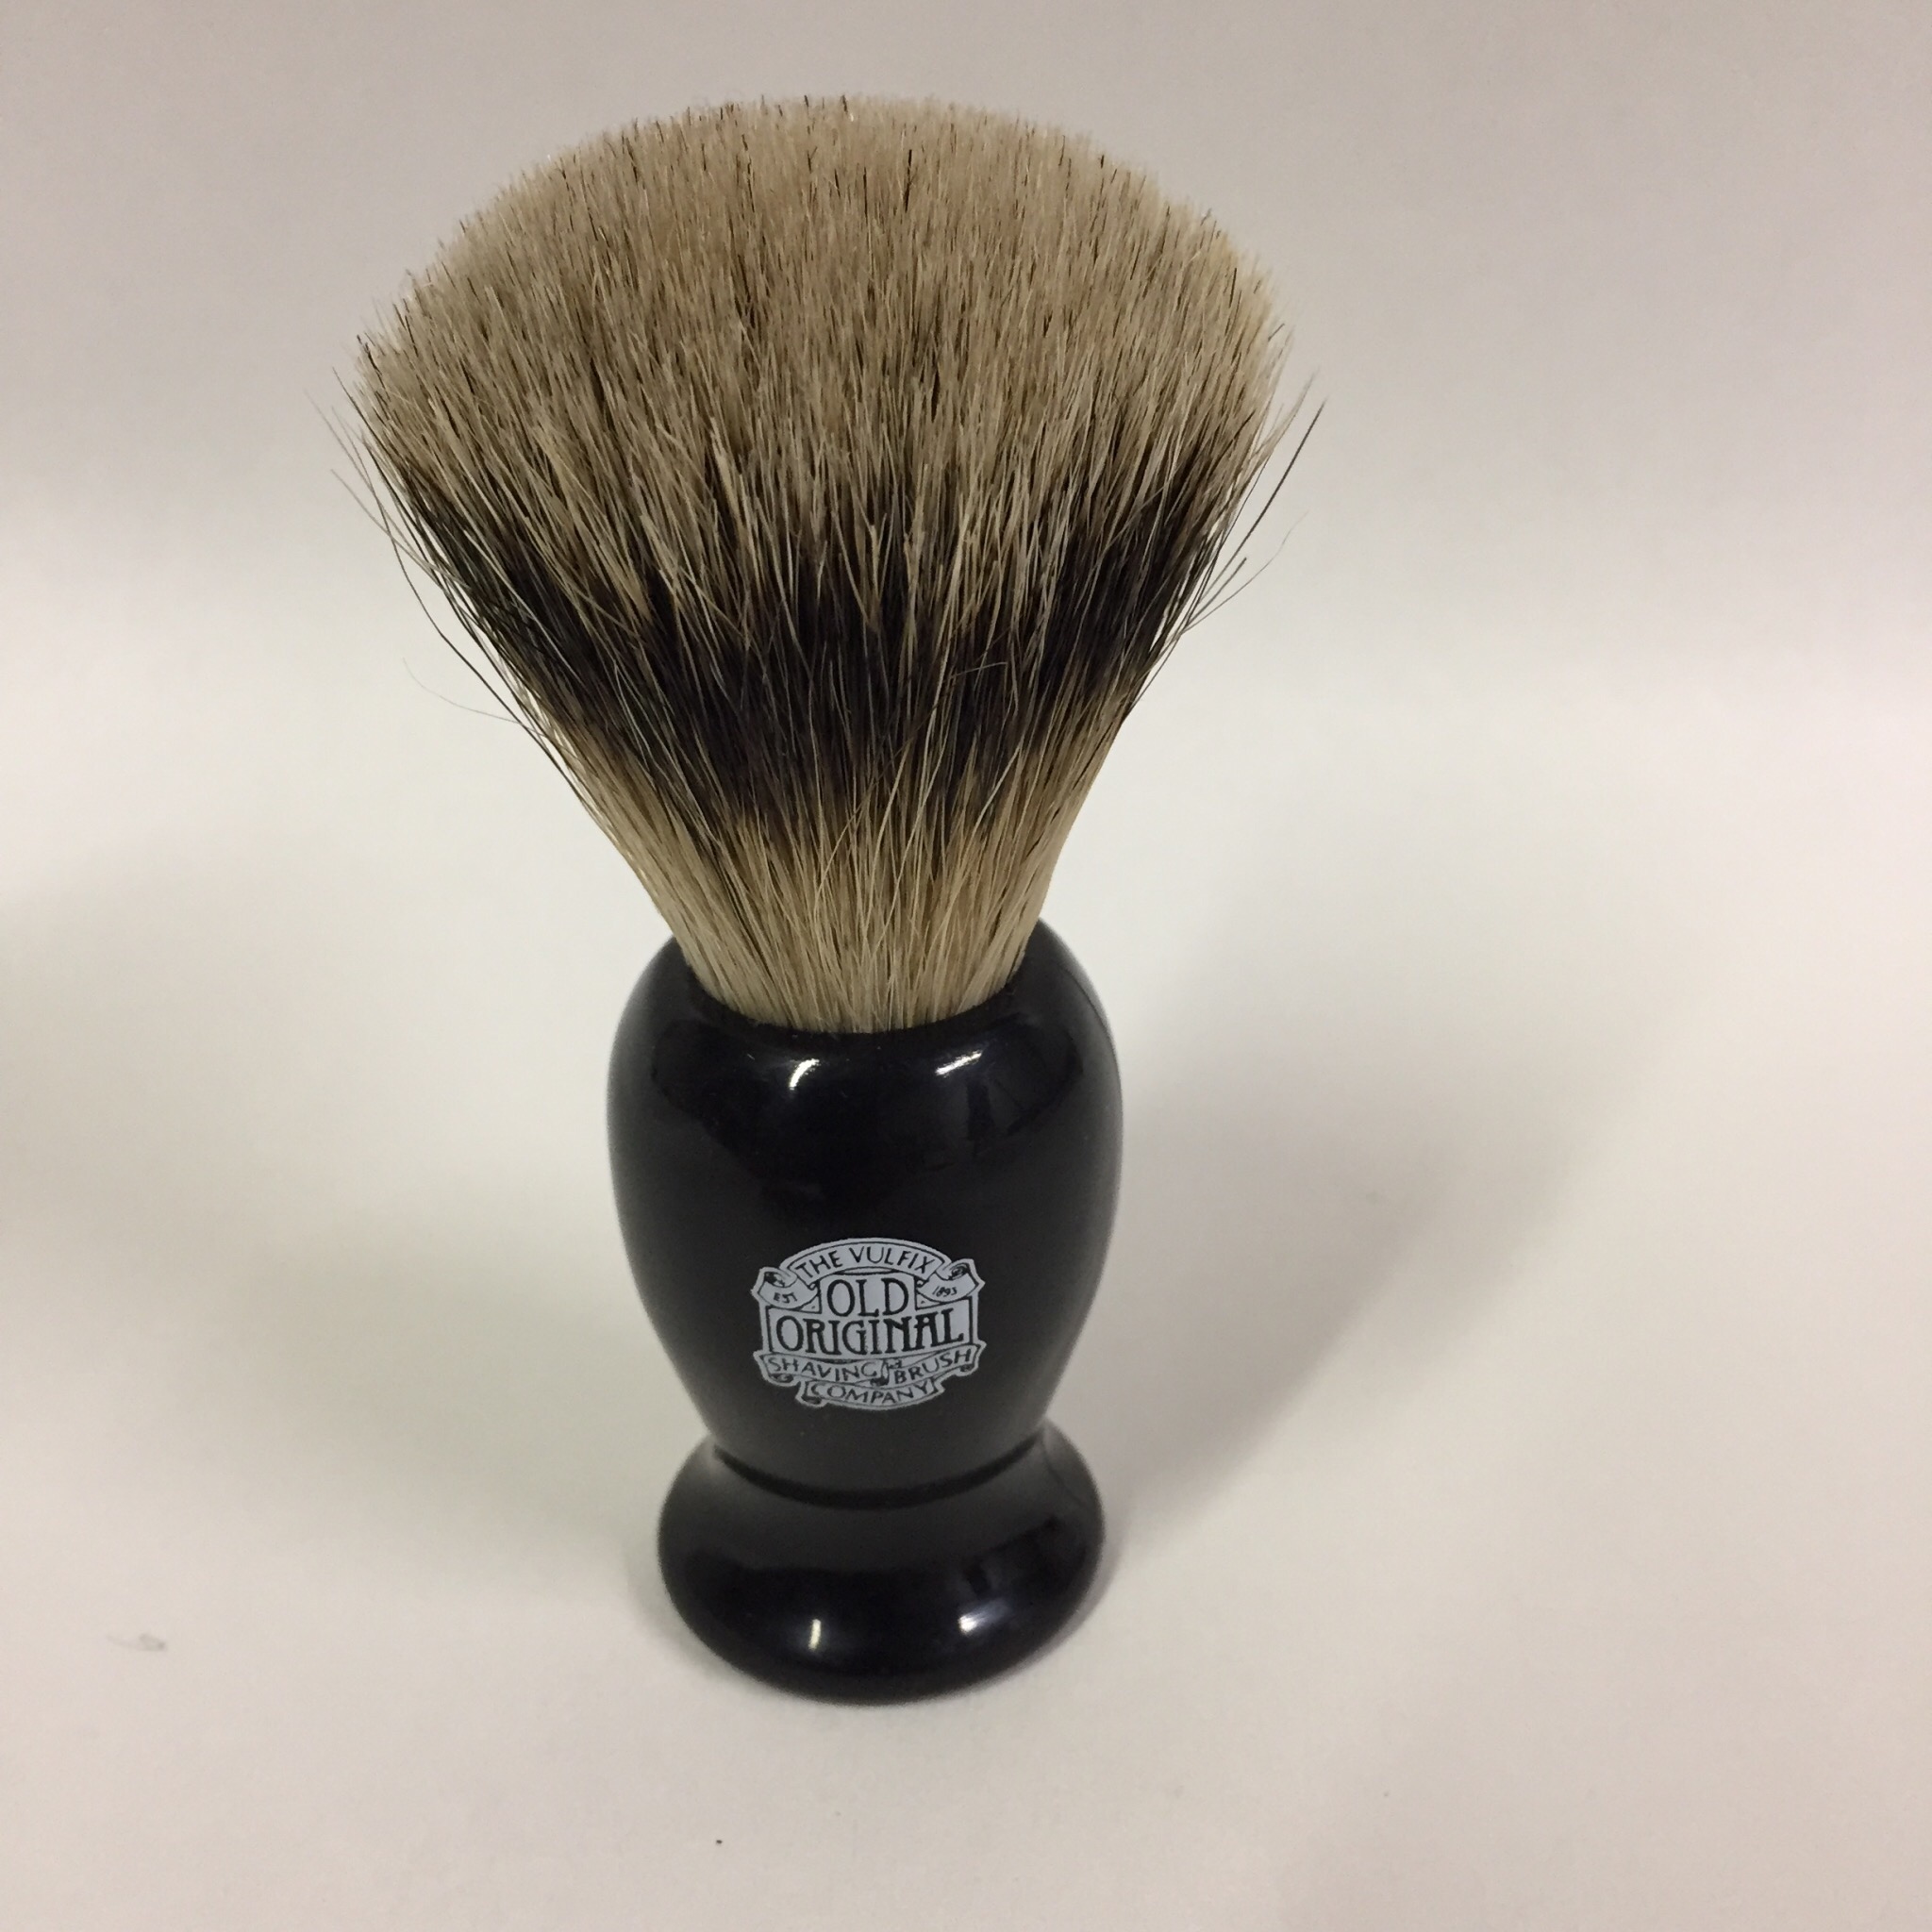 Our black handled super badger is luxury! made in England, super badger is a very sloft yet durable bristled brush in a black composite handle. Your face will love the gentle feel of this brush working up the lather on your face. $35.00